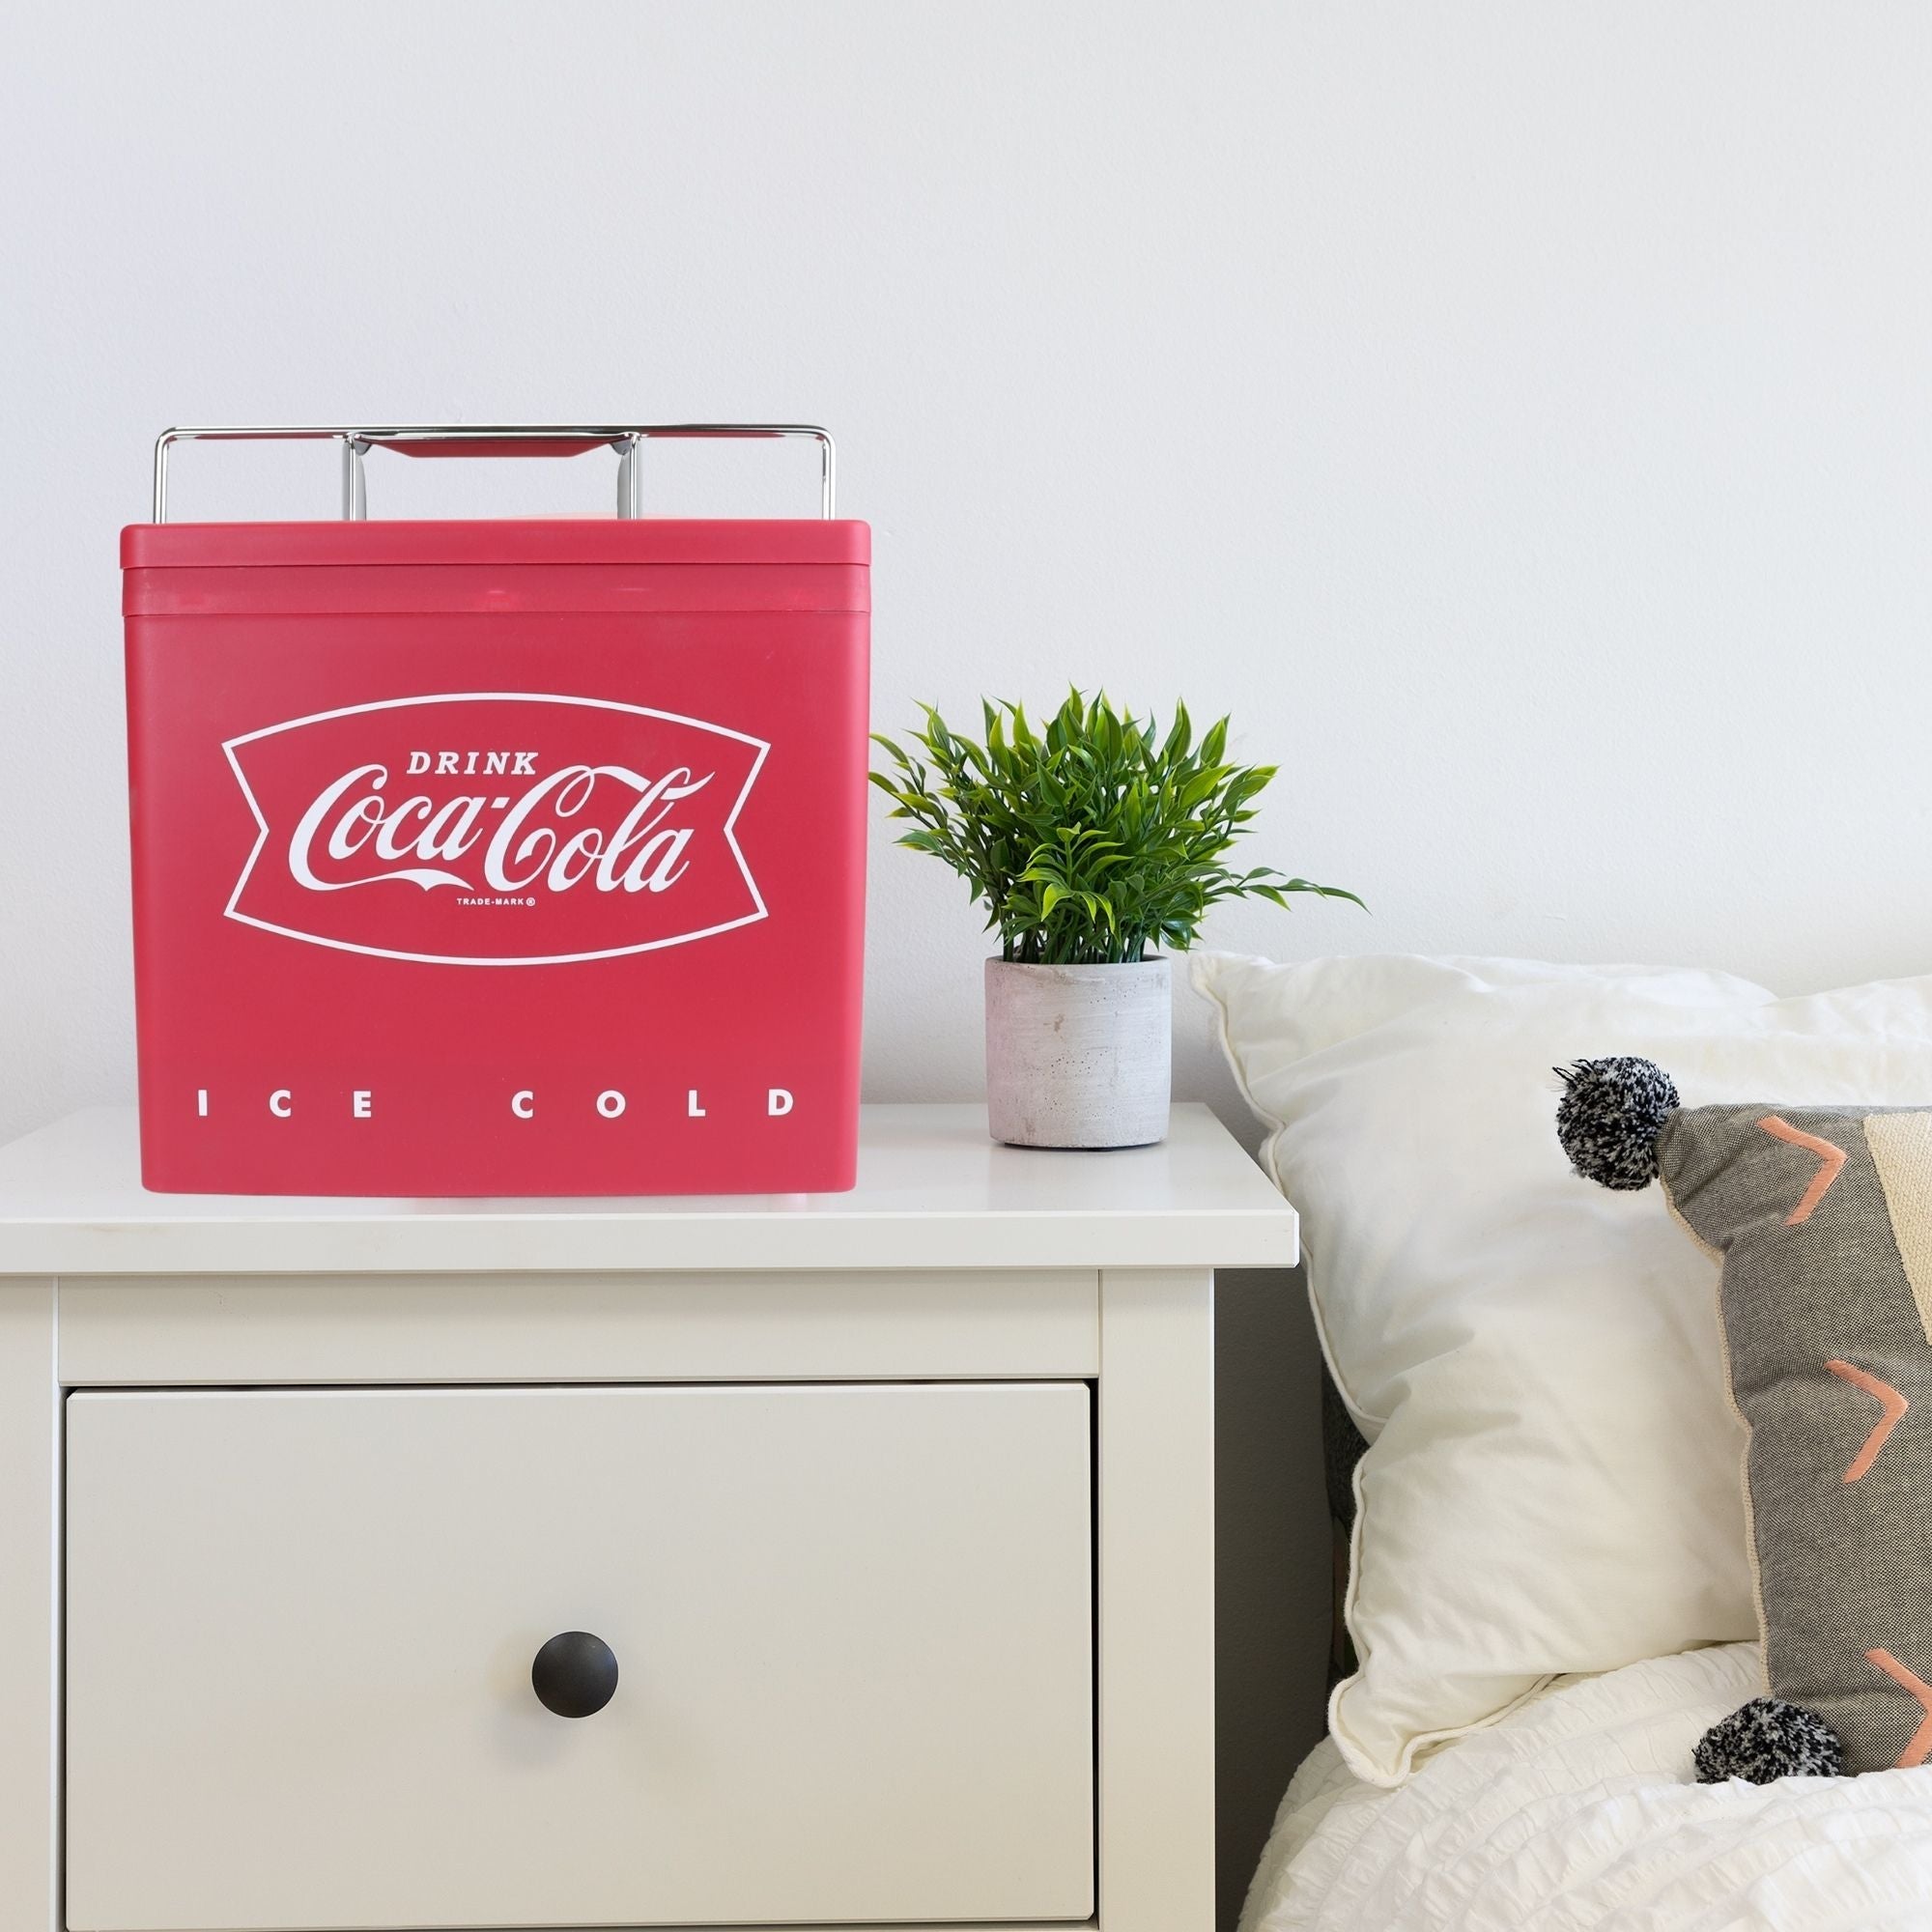 https://cdn.shopify.com/s/files/1/0558/1674/9125/products/coca_cola_retro_ice_chest_style_electric_cooler_6_can_2.jpg?v=1668704291&width=2000